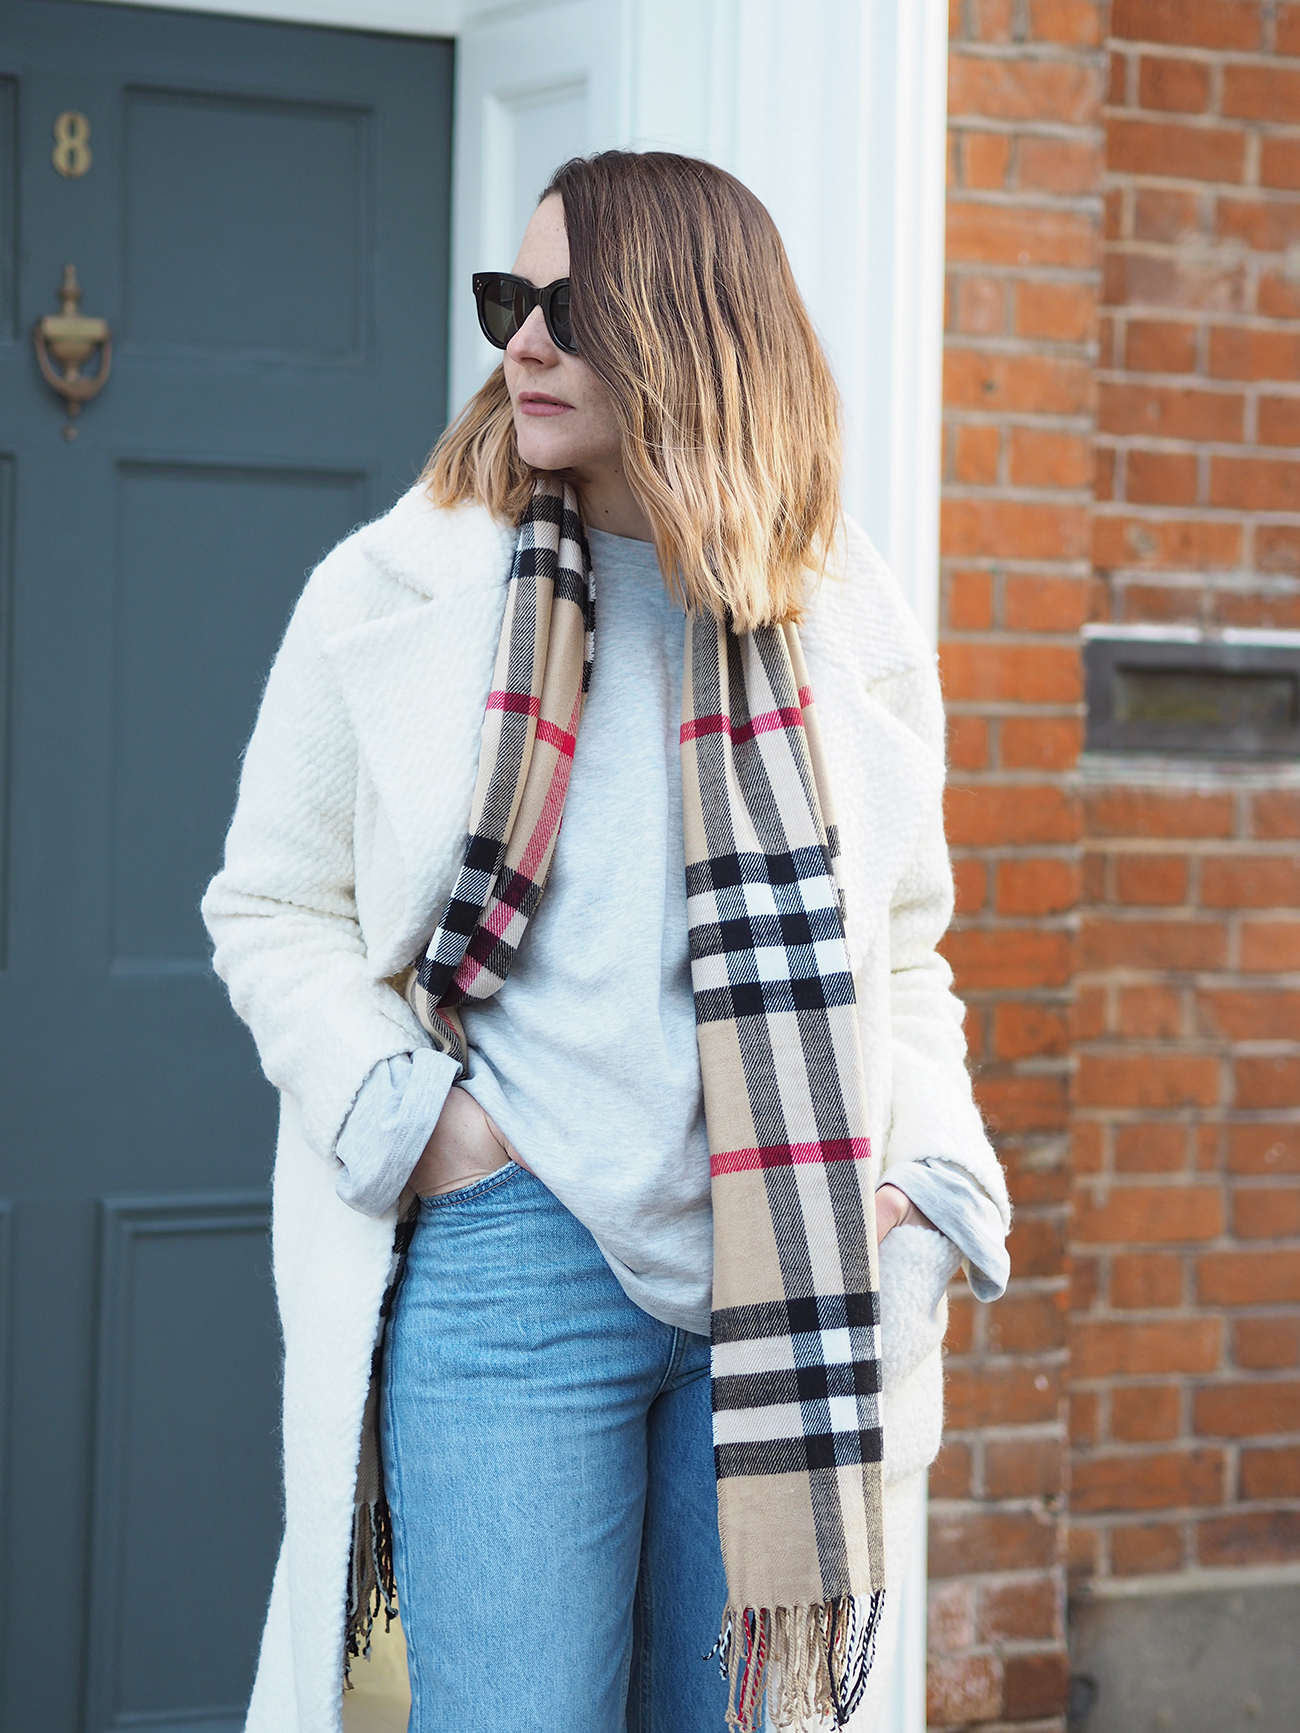 cream coat and burberry scarf outfit with jeans